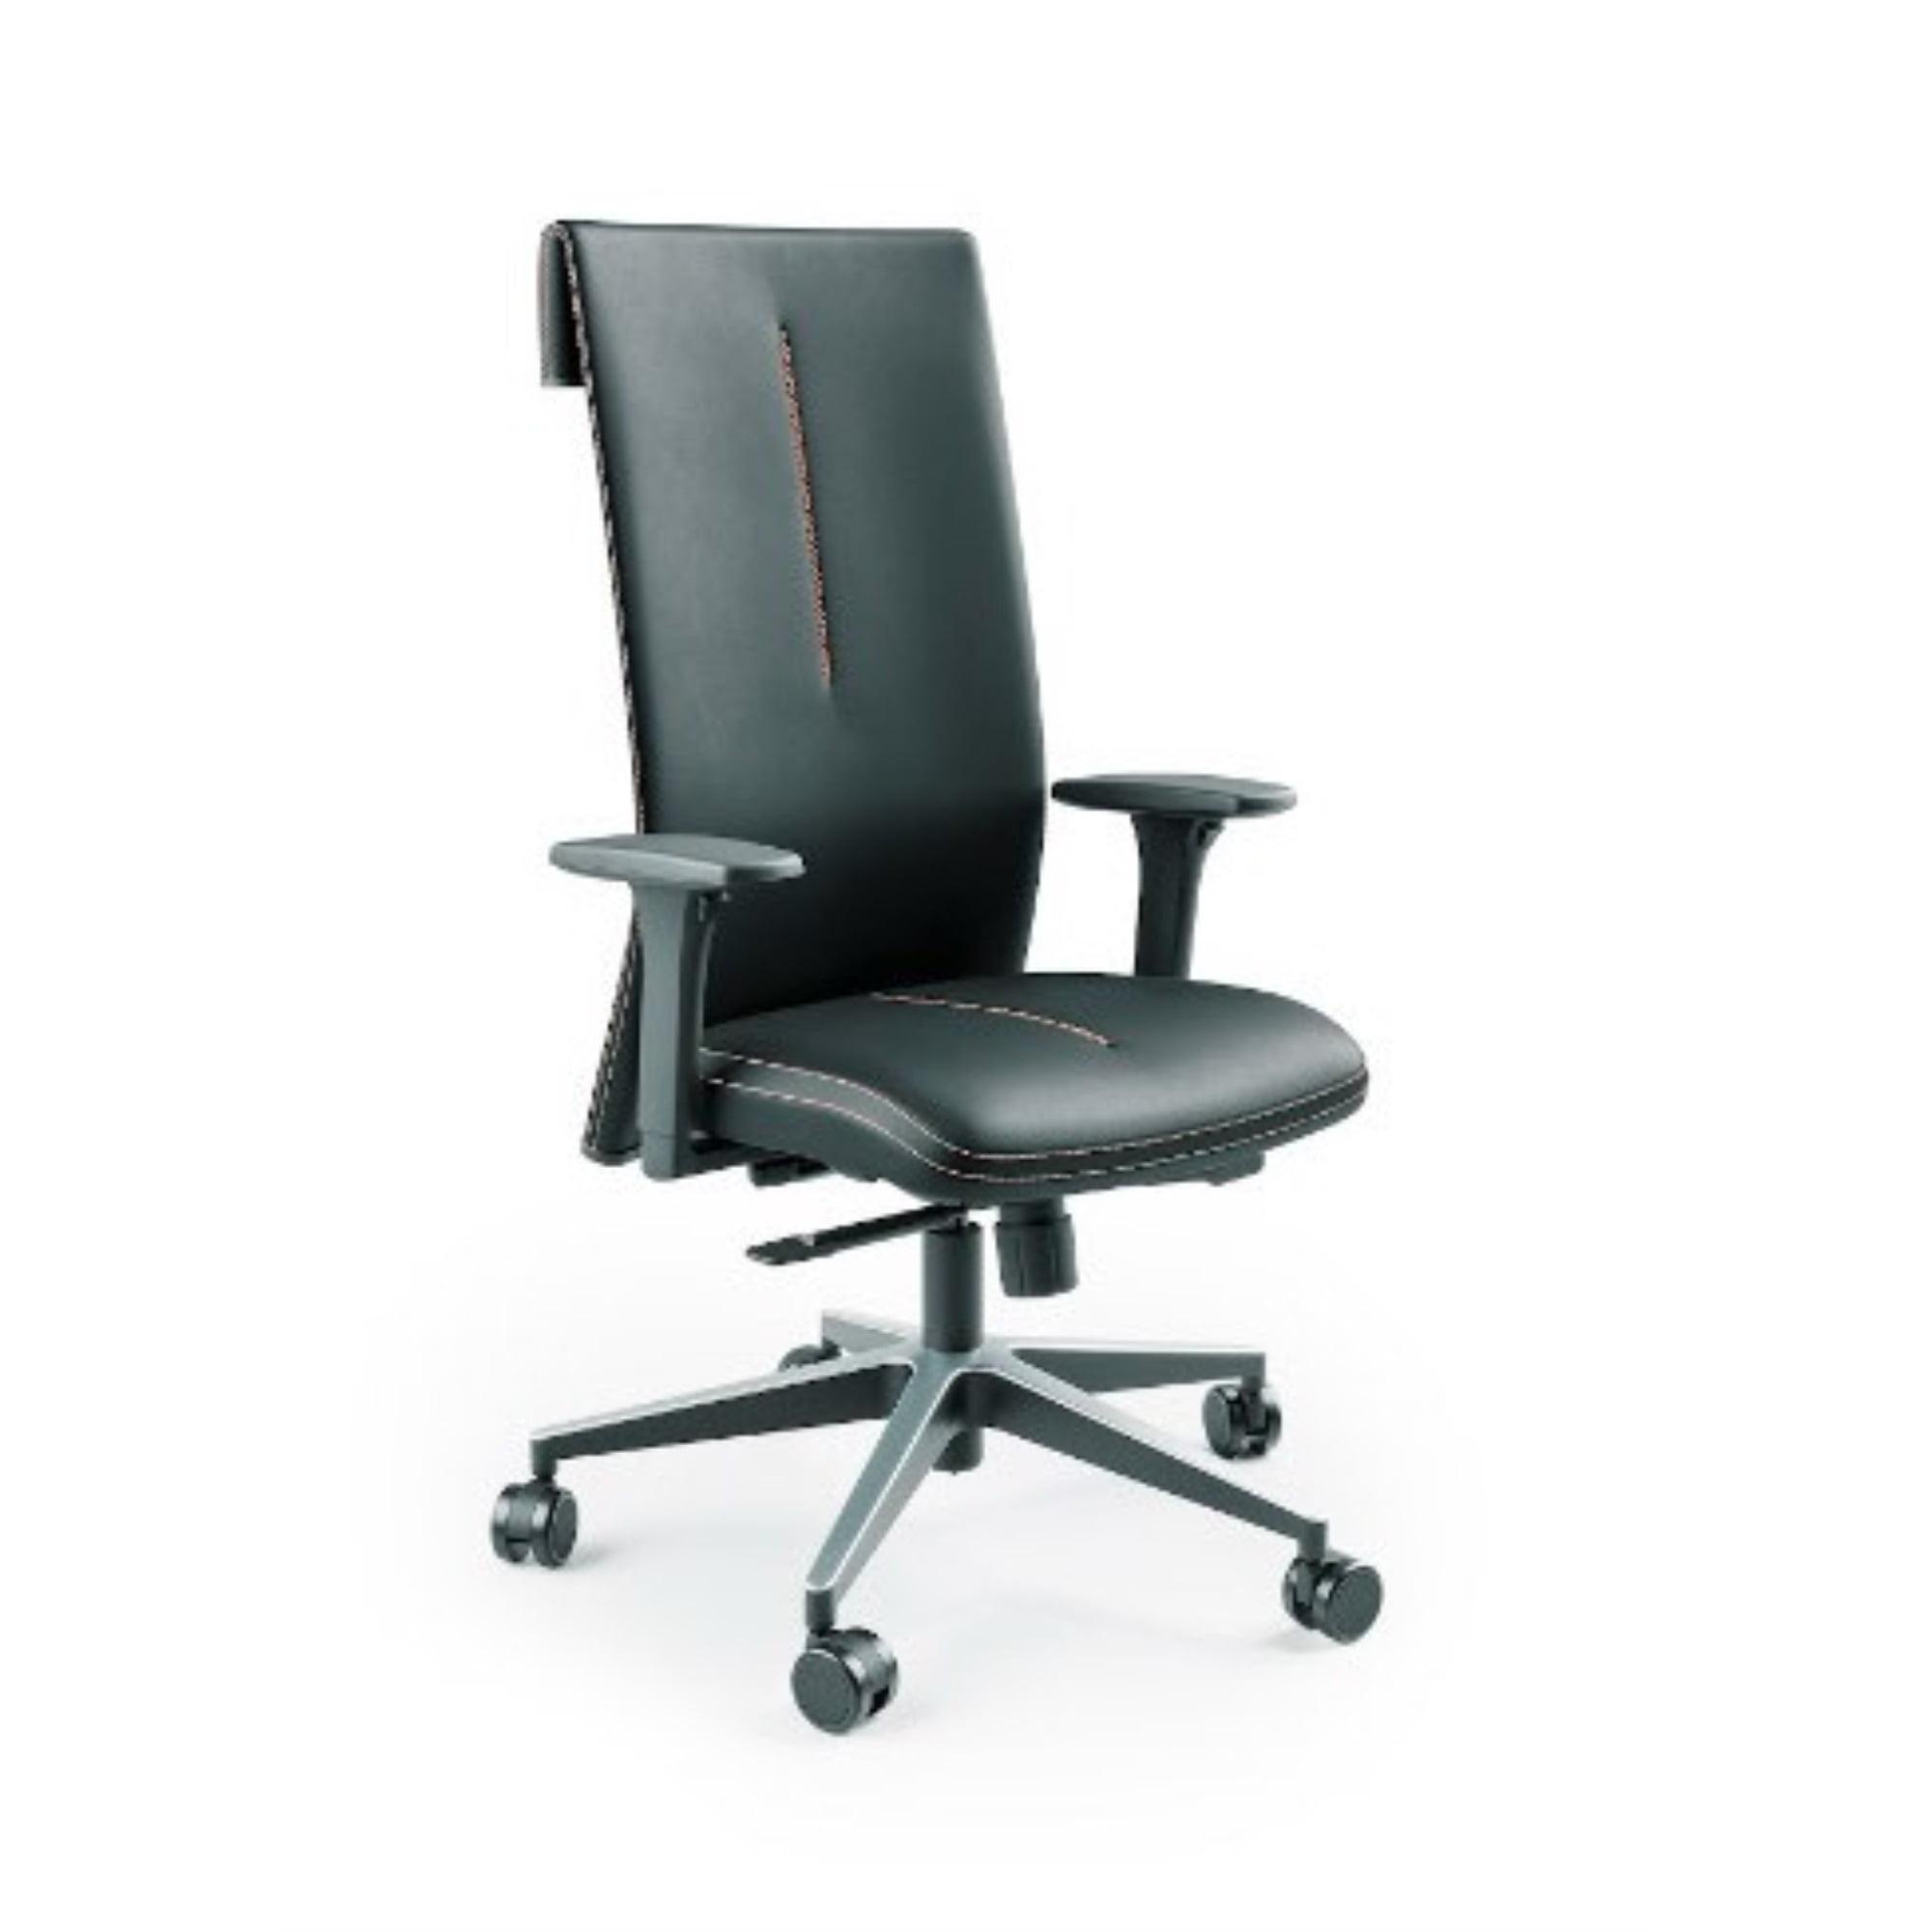 High Back Executive Black Leather Adjustable Office Chair